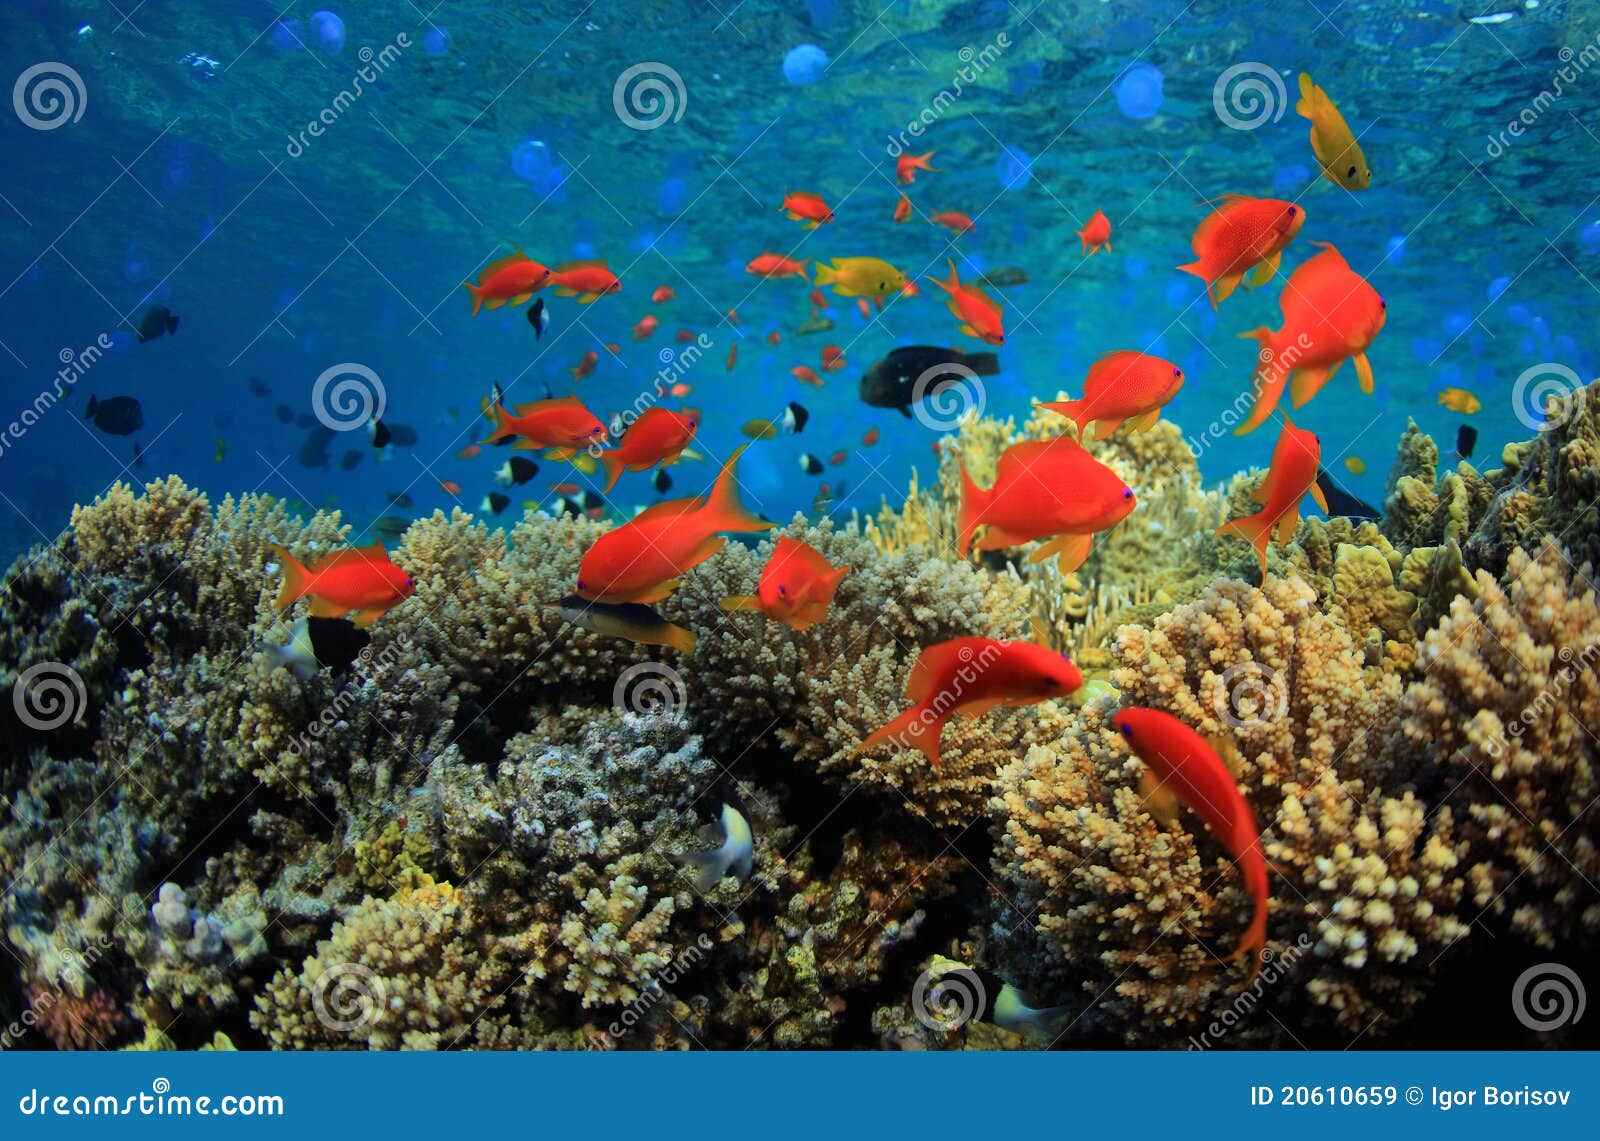 Coral reef stock image. Image of activity, reef, africa - 20610659